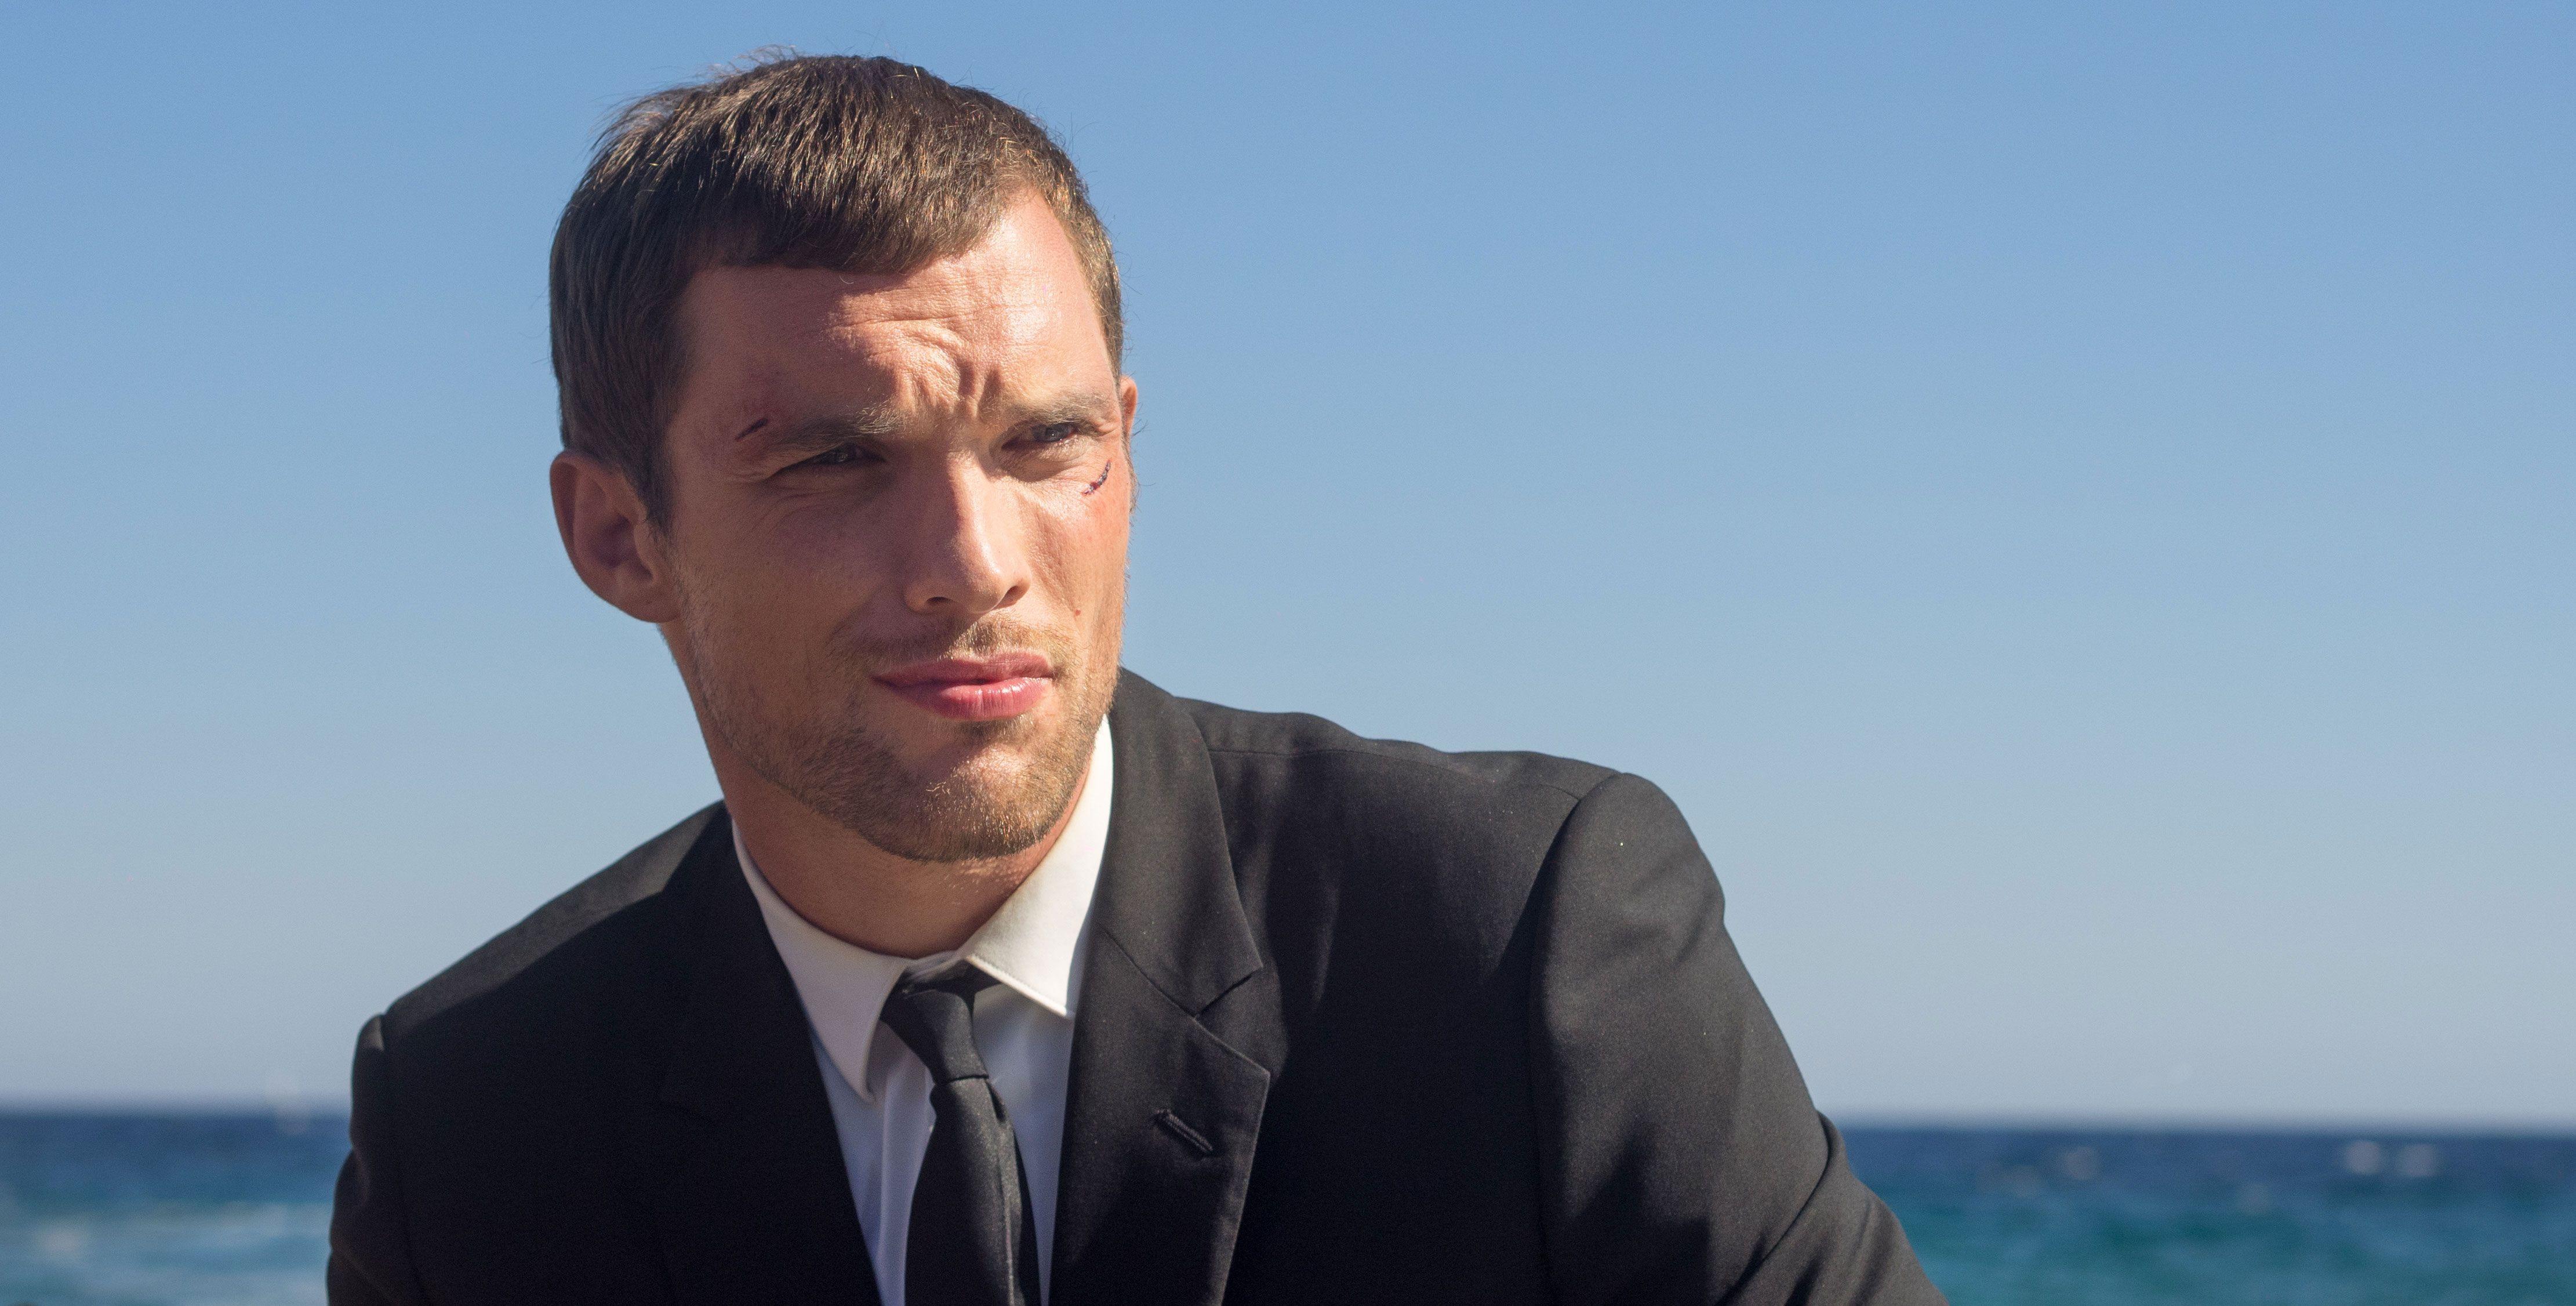 Transporter Refueled Clips and Image with Ed Skrein